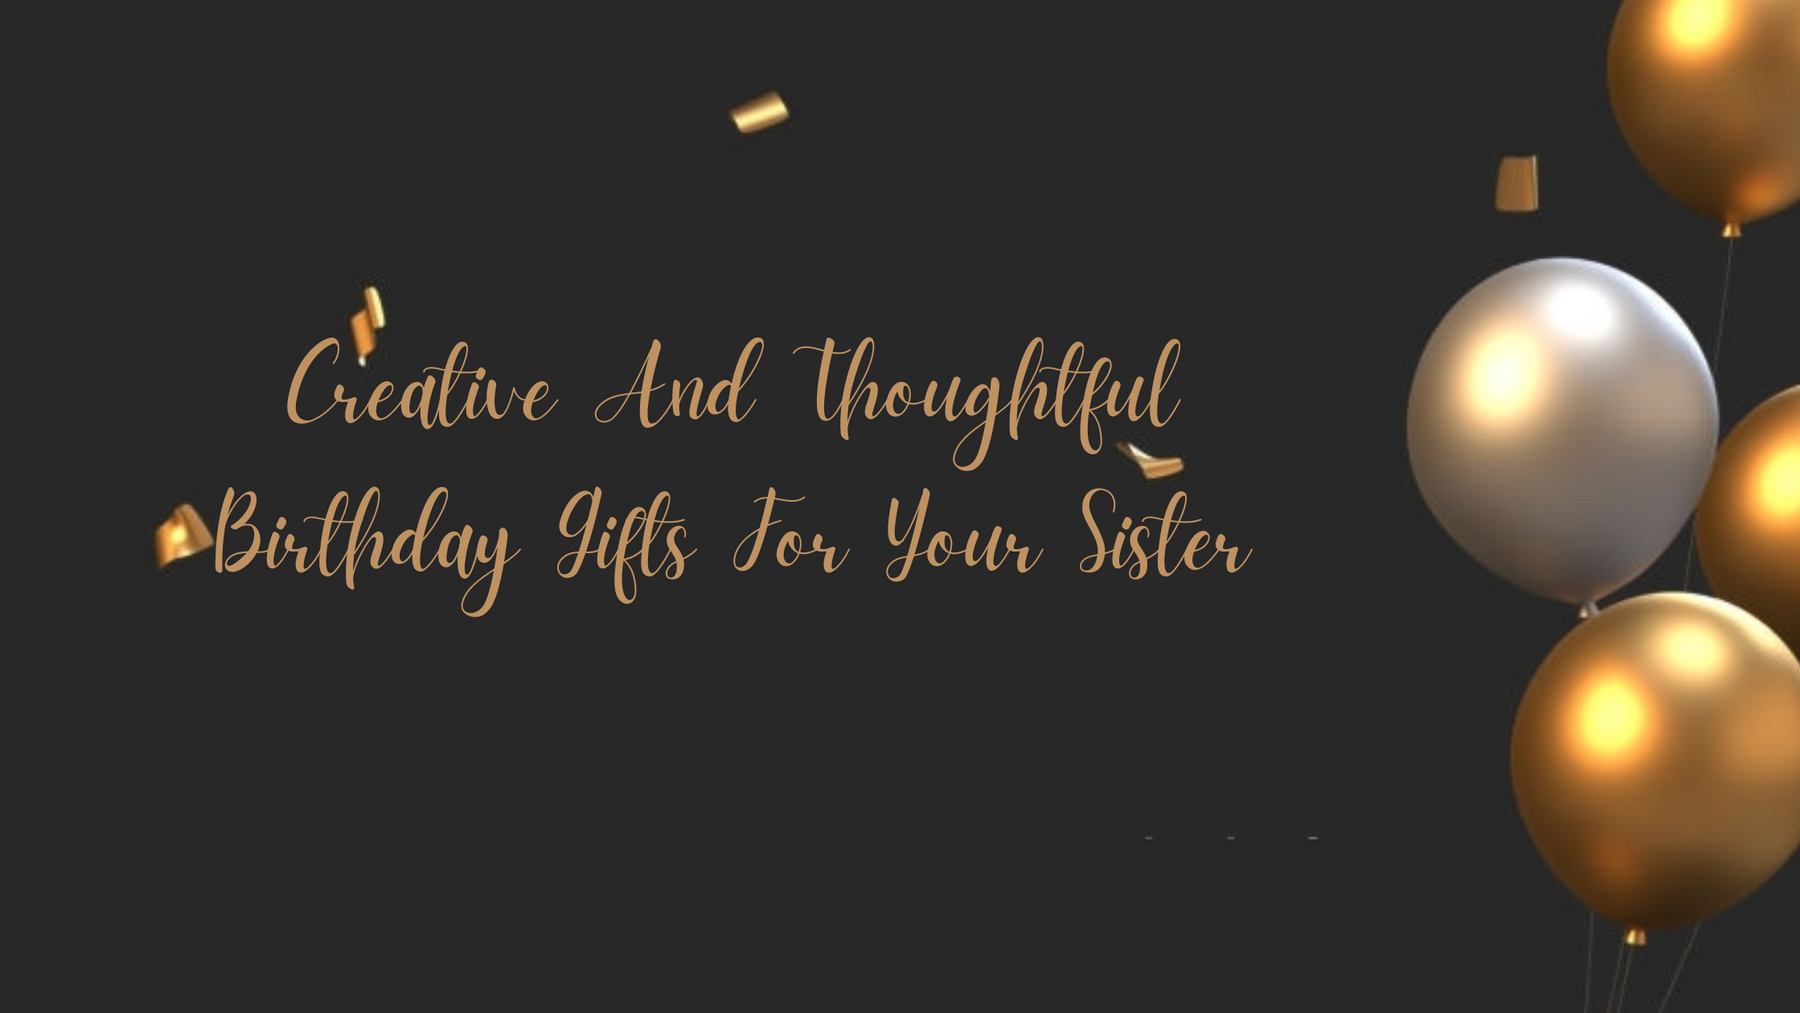 Creative And Thoughtful Birthday Gifts For Your Sister